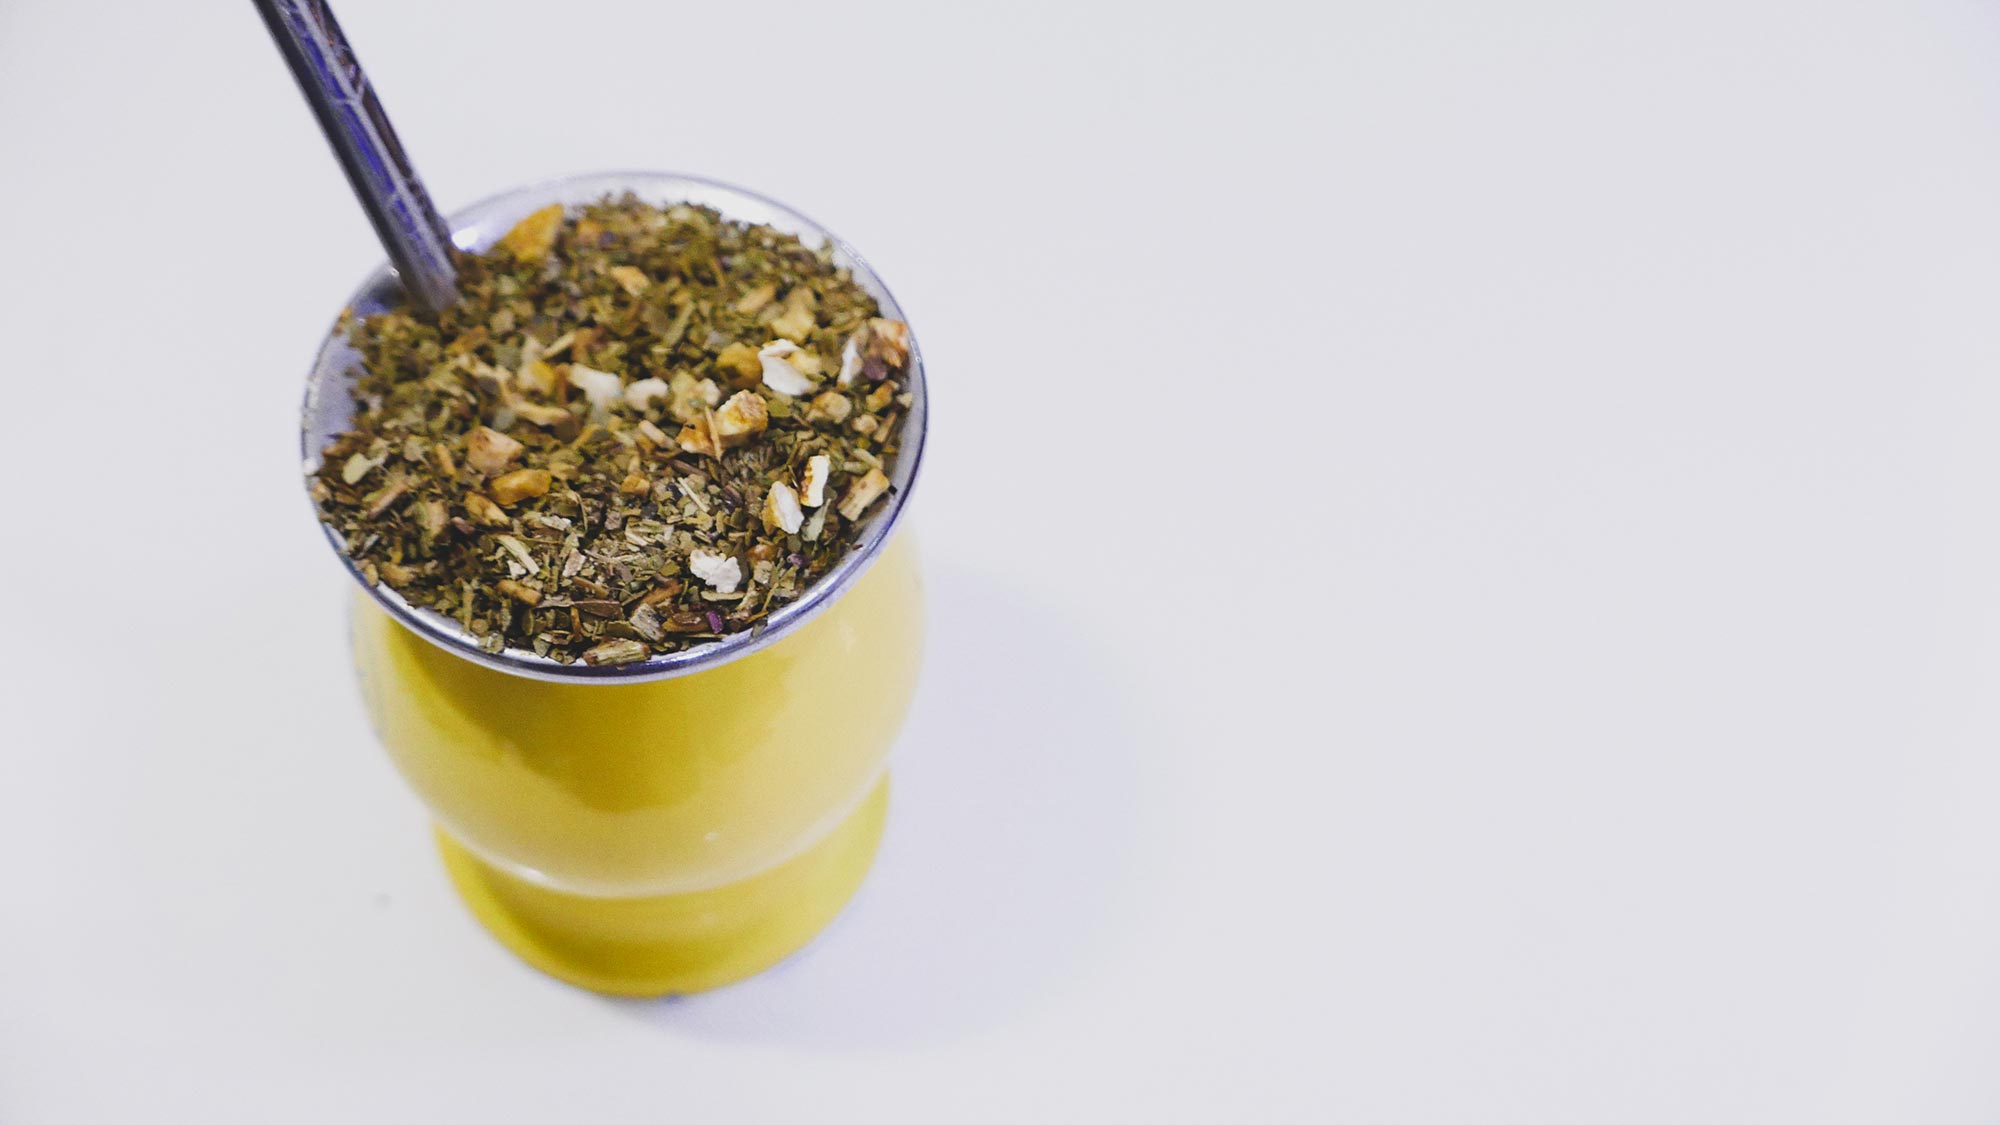 Is there any benefit to drinking Yerba mate tea?